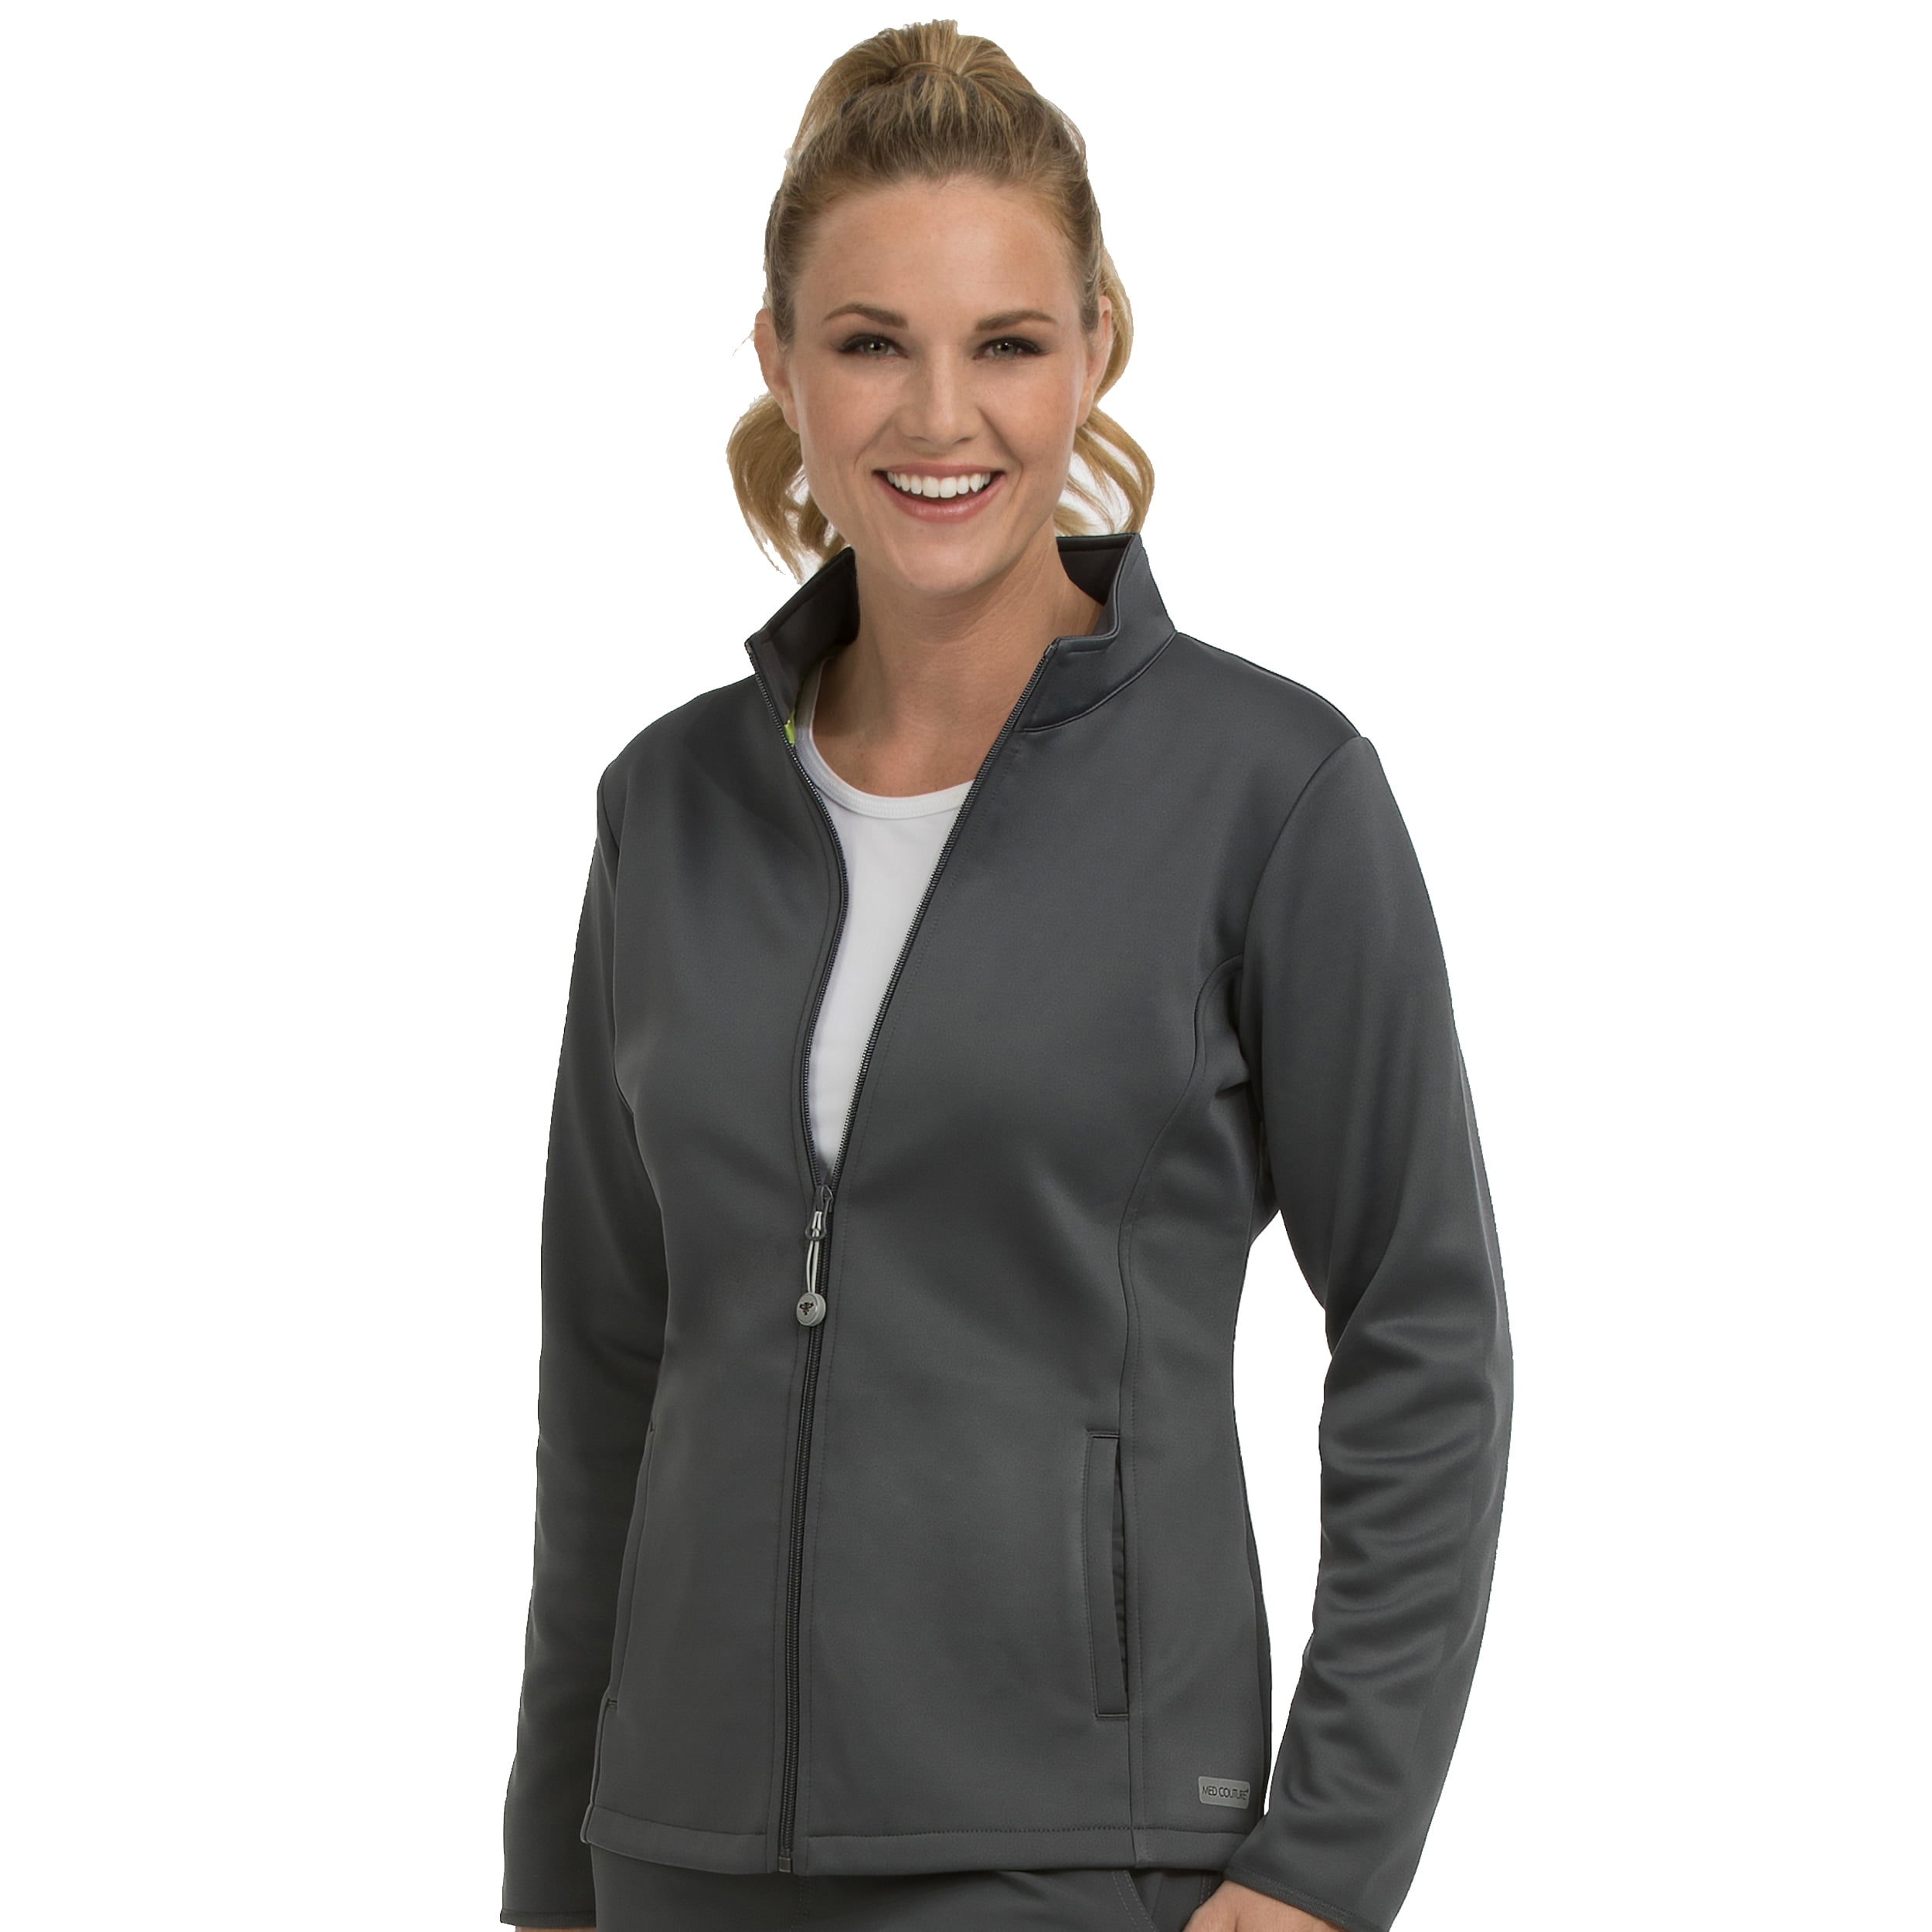 Med Couture Performance Fleece Jacket for Women 